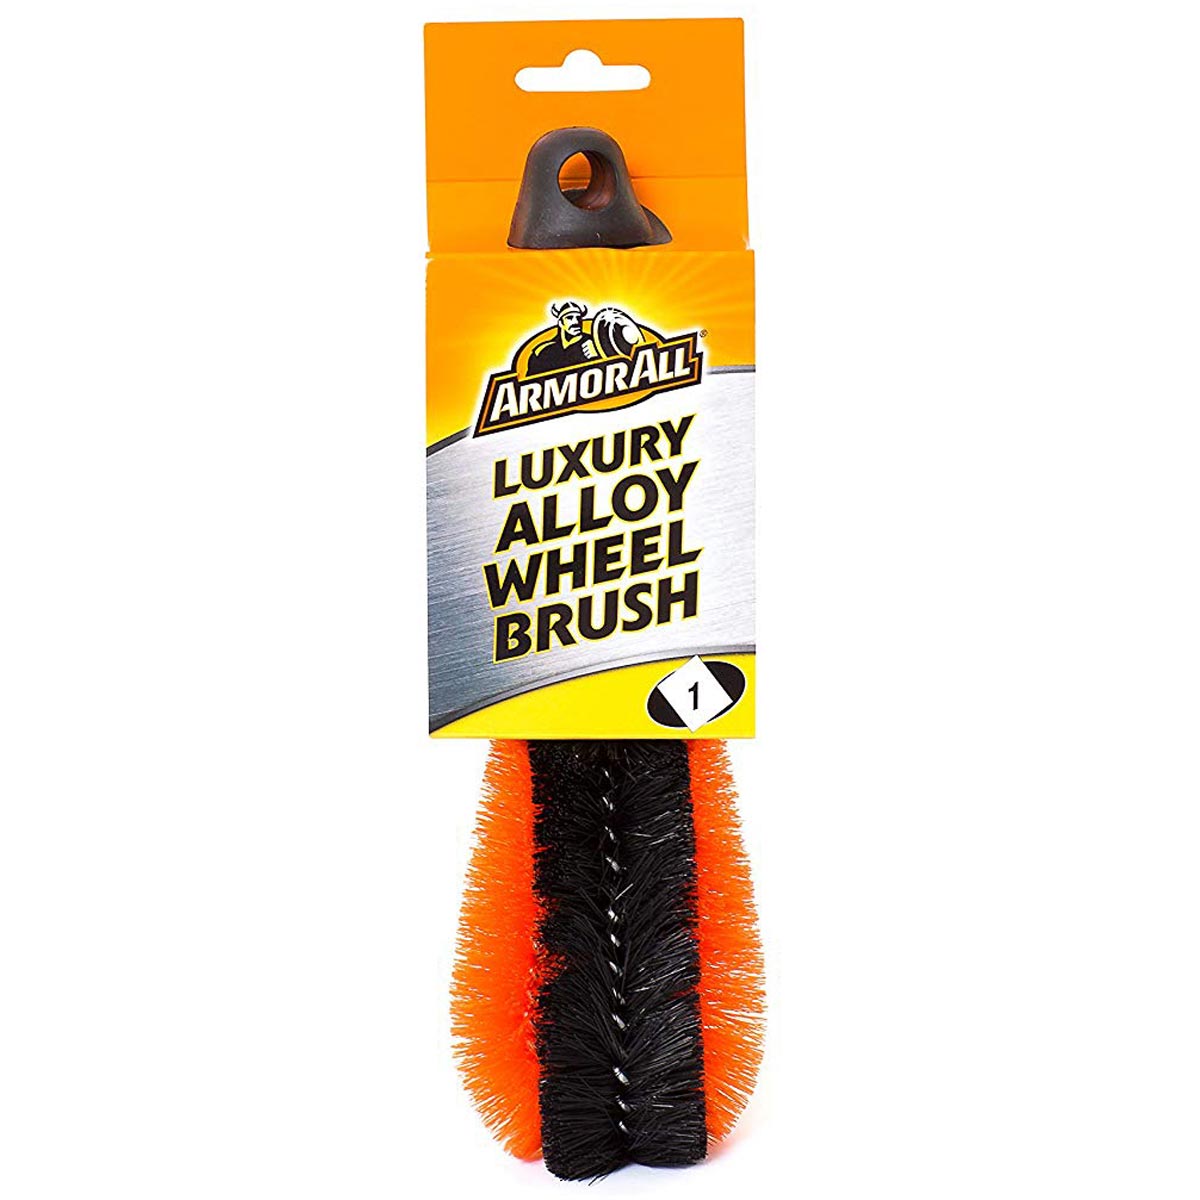 Armor All Luxury Alloy Wheel Brush: Clean your wheels with ease!